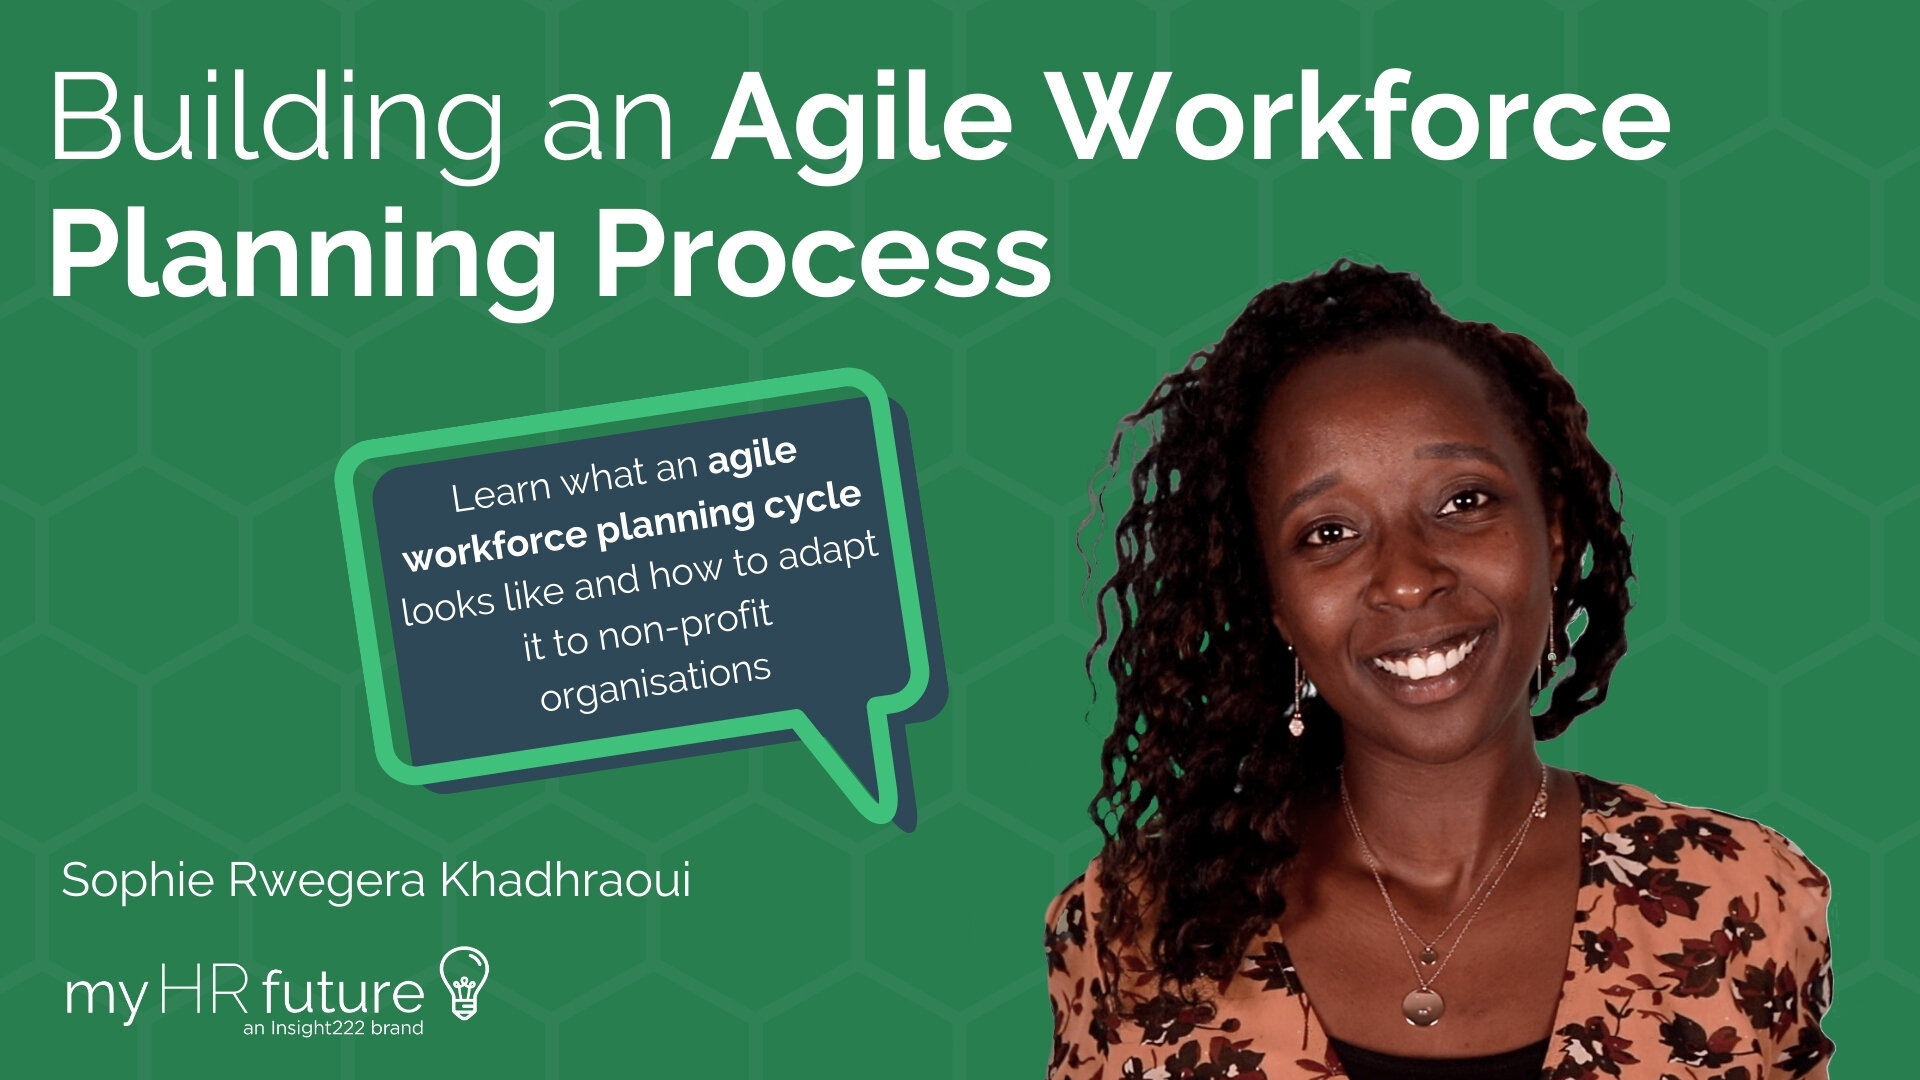 Building an Agile Workforce Planning Process